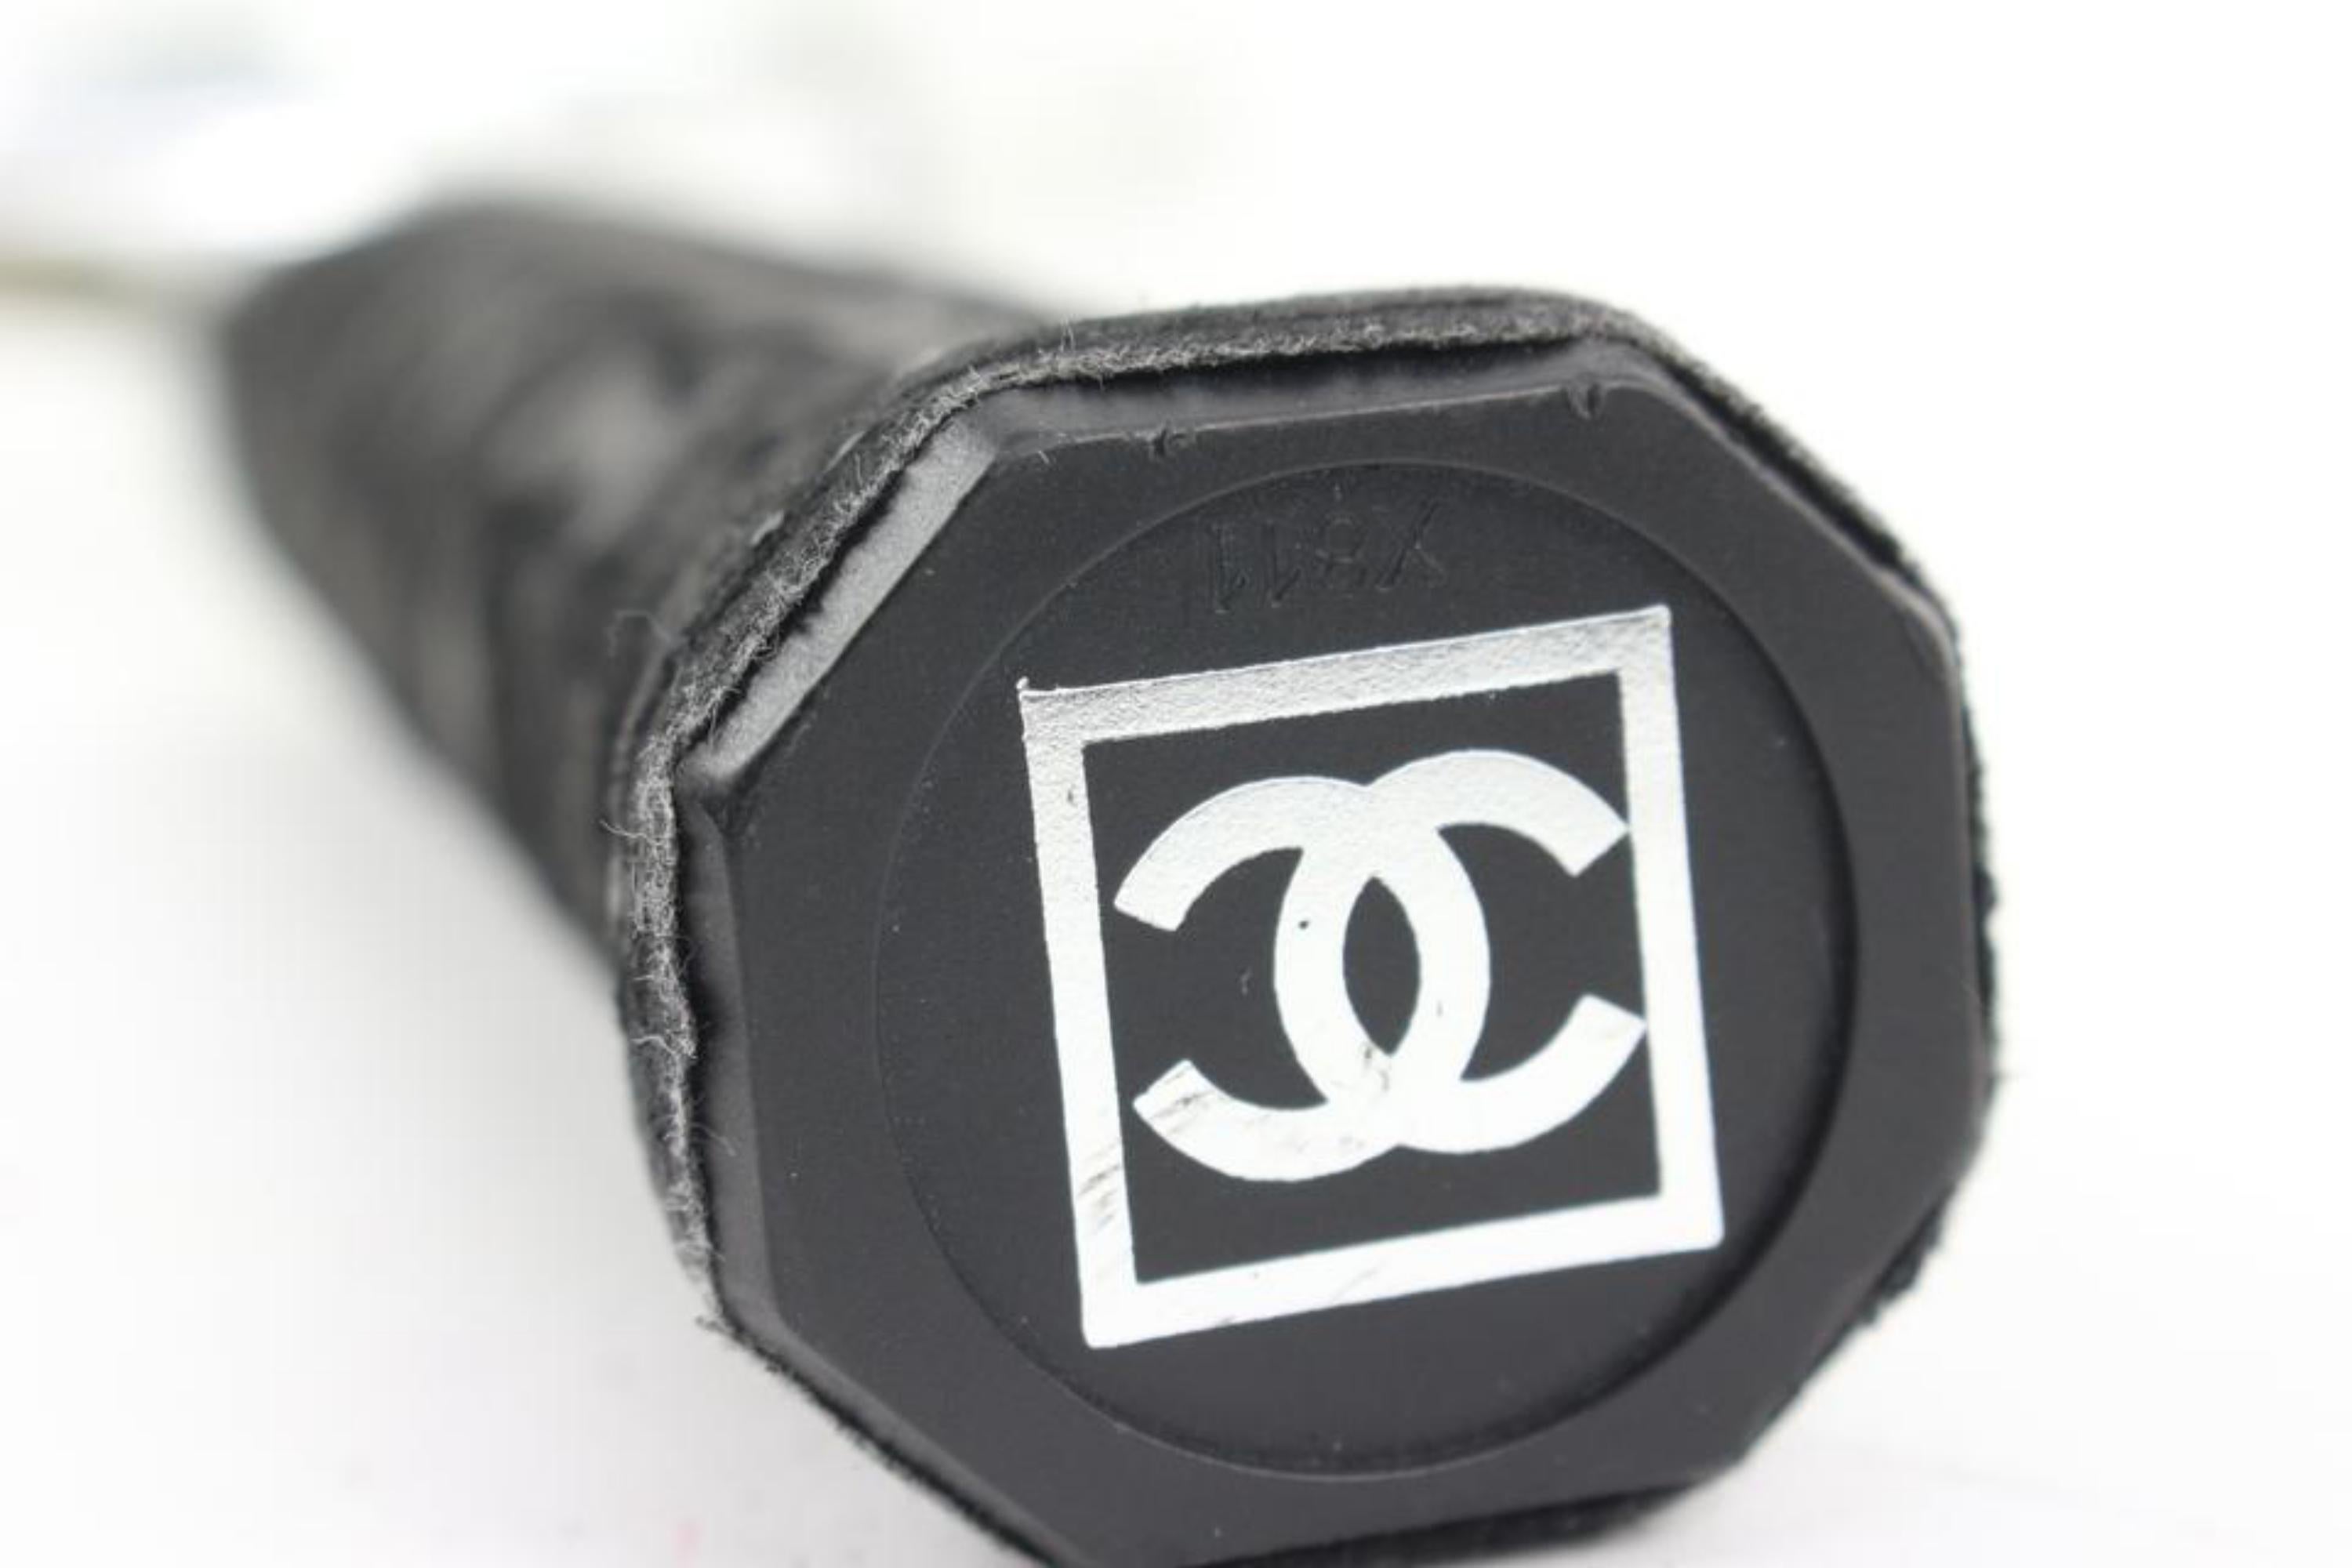 Chanel Rare CC Logo Tennis Racquet Sports Racket with Carrying Case s210ck65
Measurements: Length:  11